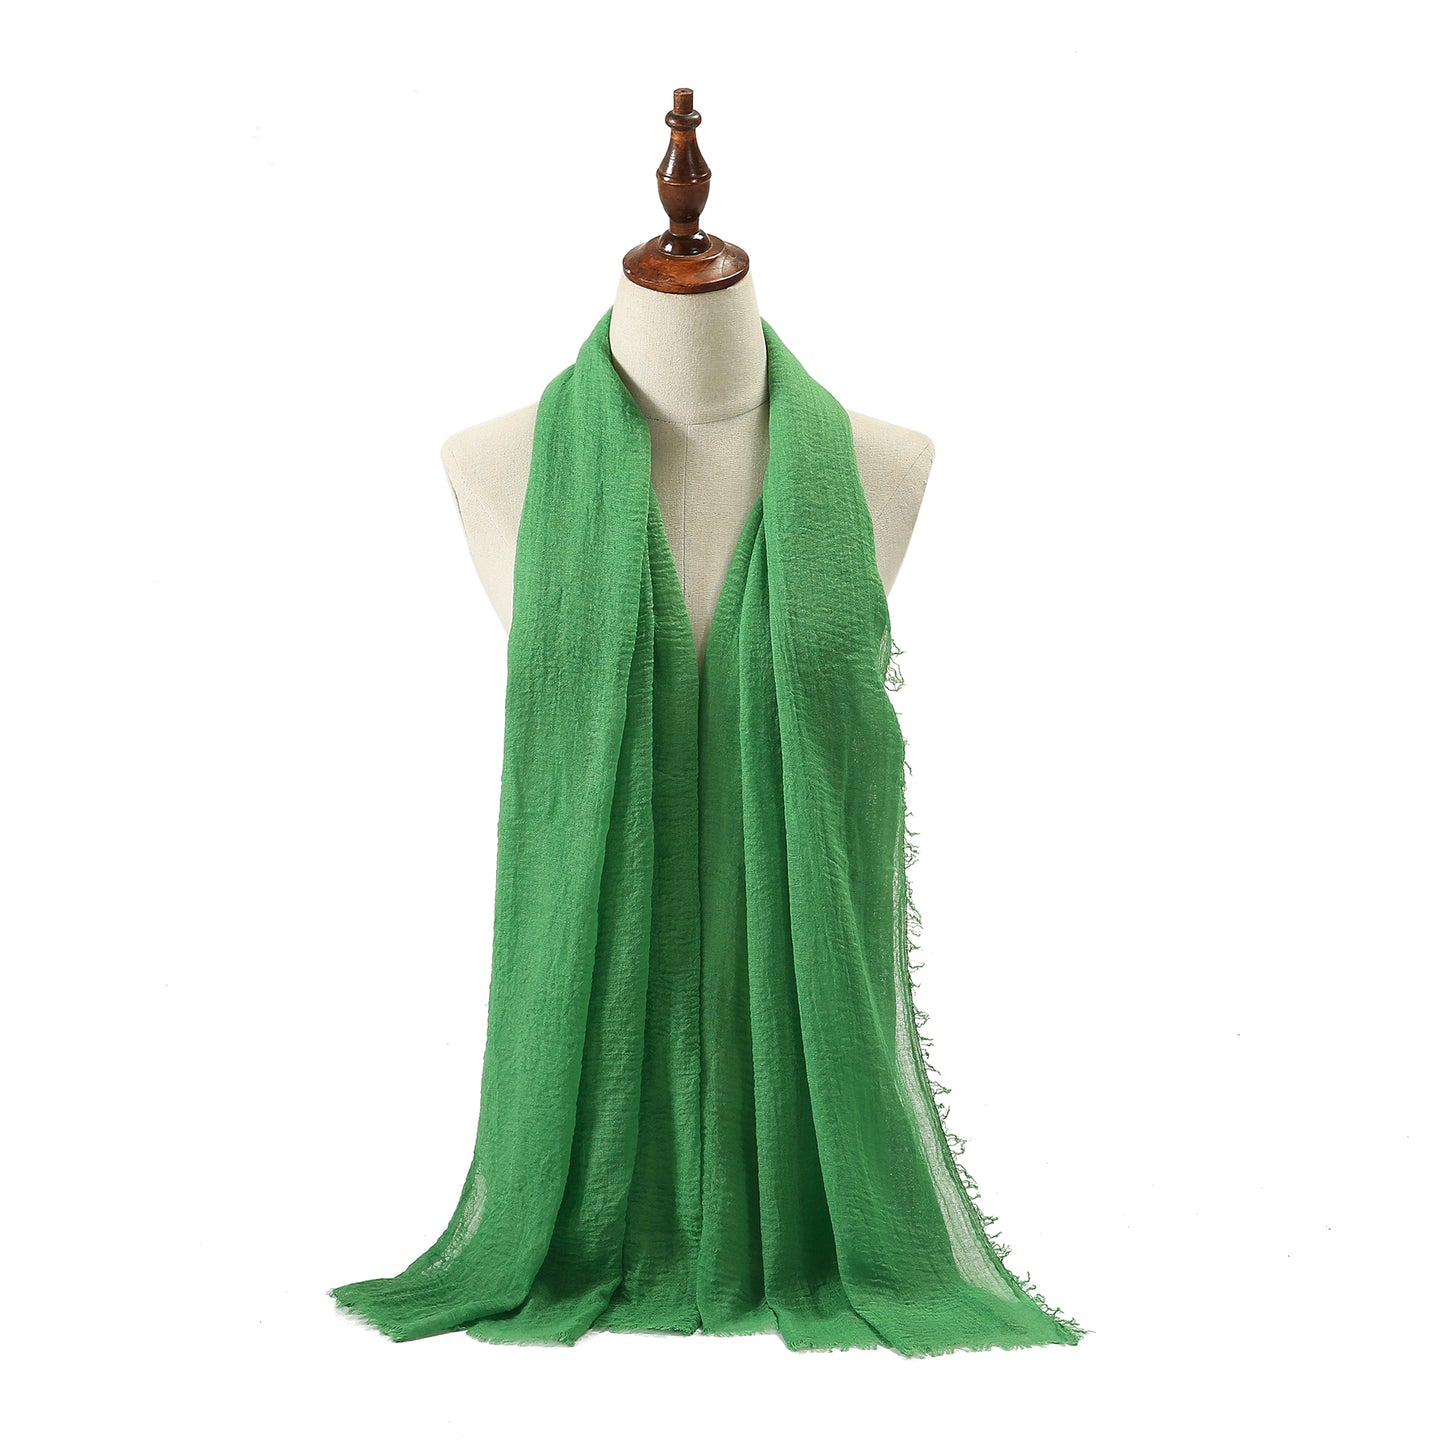 The all time essential scarf appelgroen